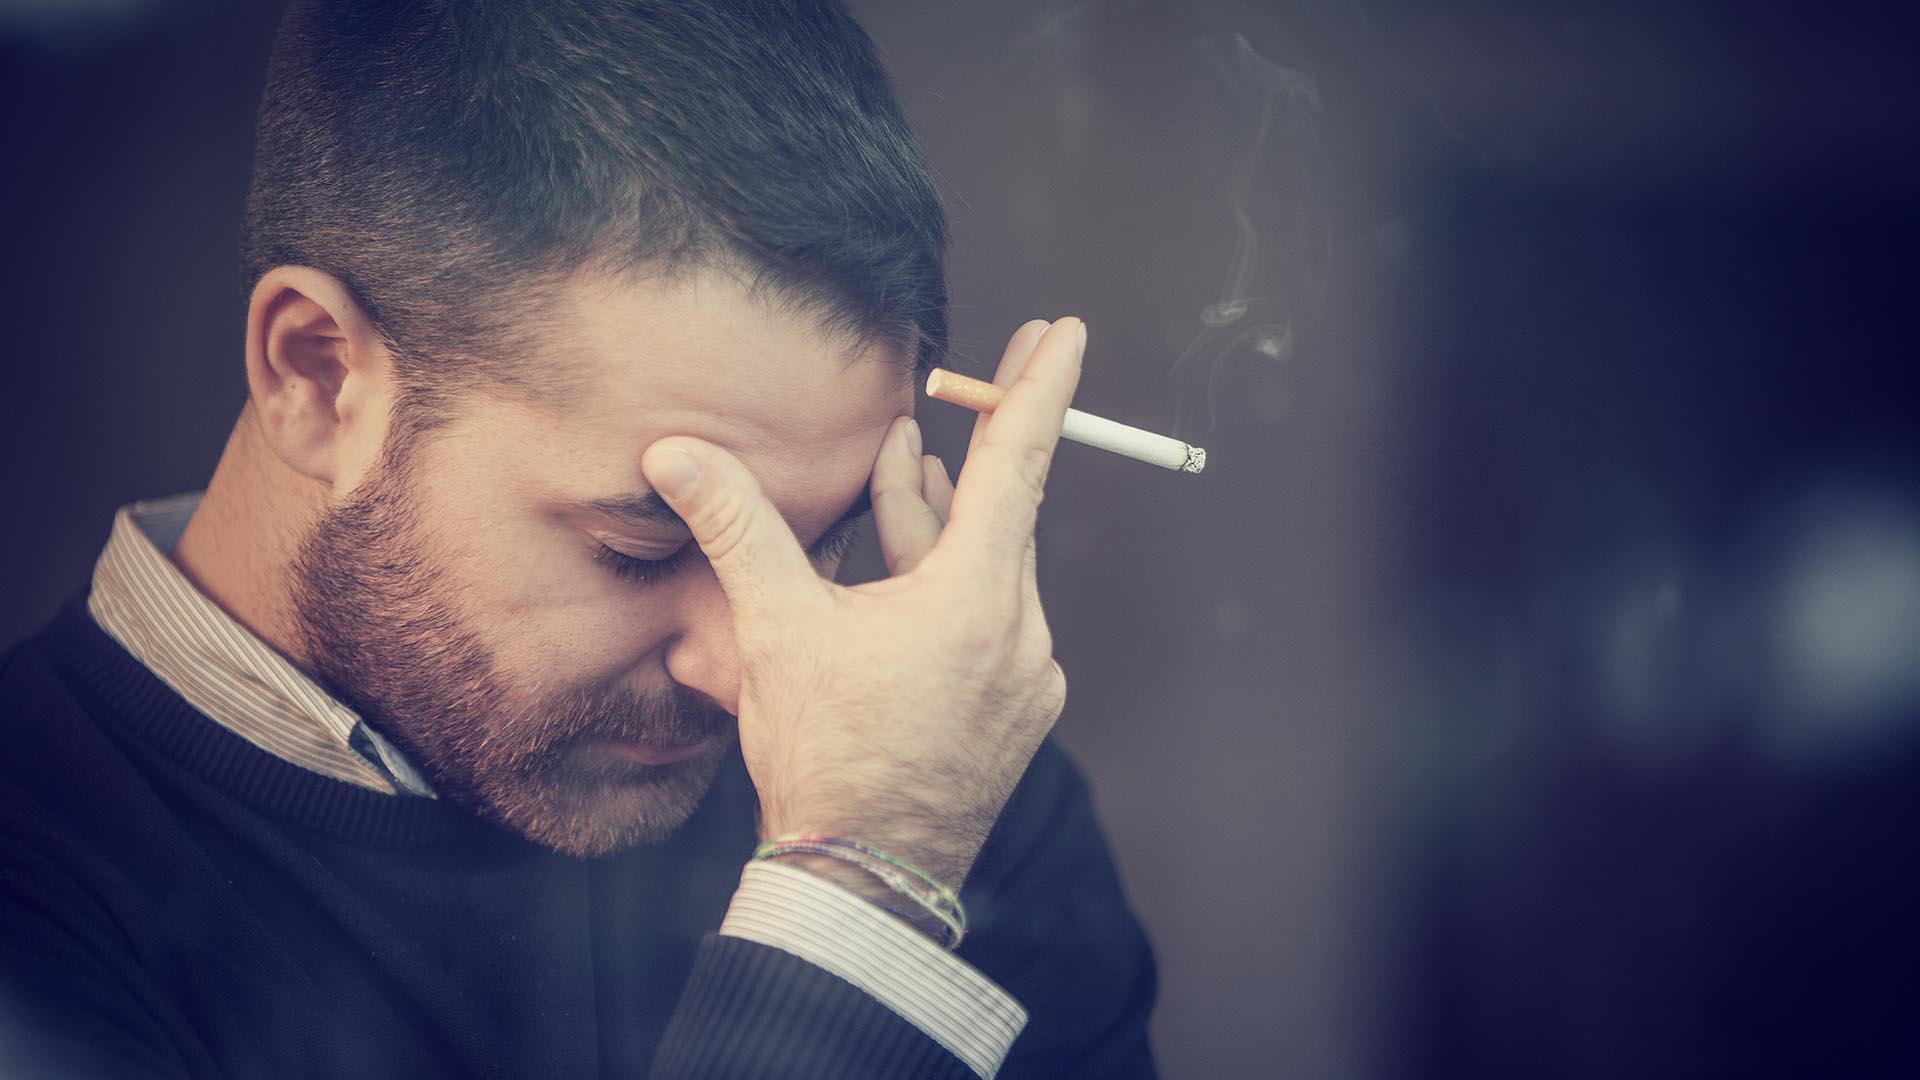 Cigarette smoking increases the risk of developing age-related macular degeneration